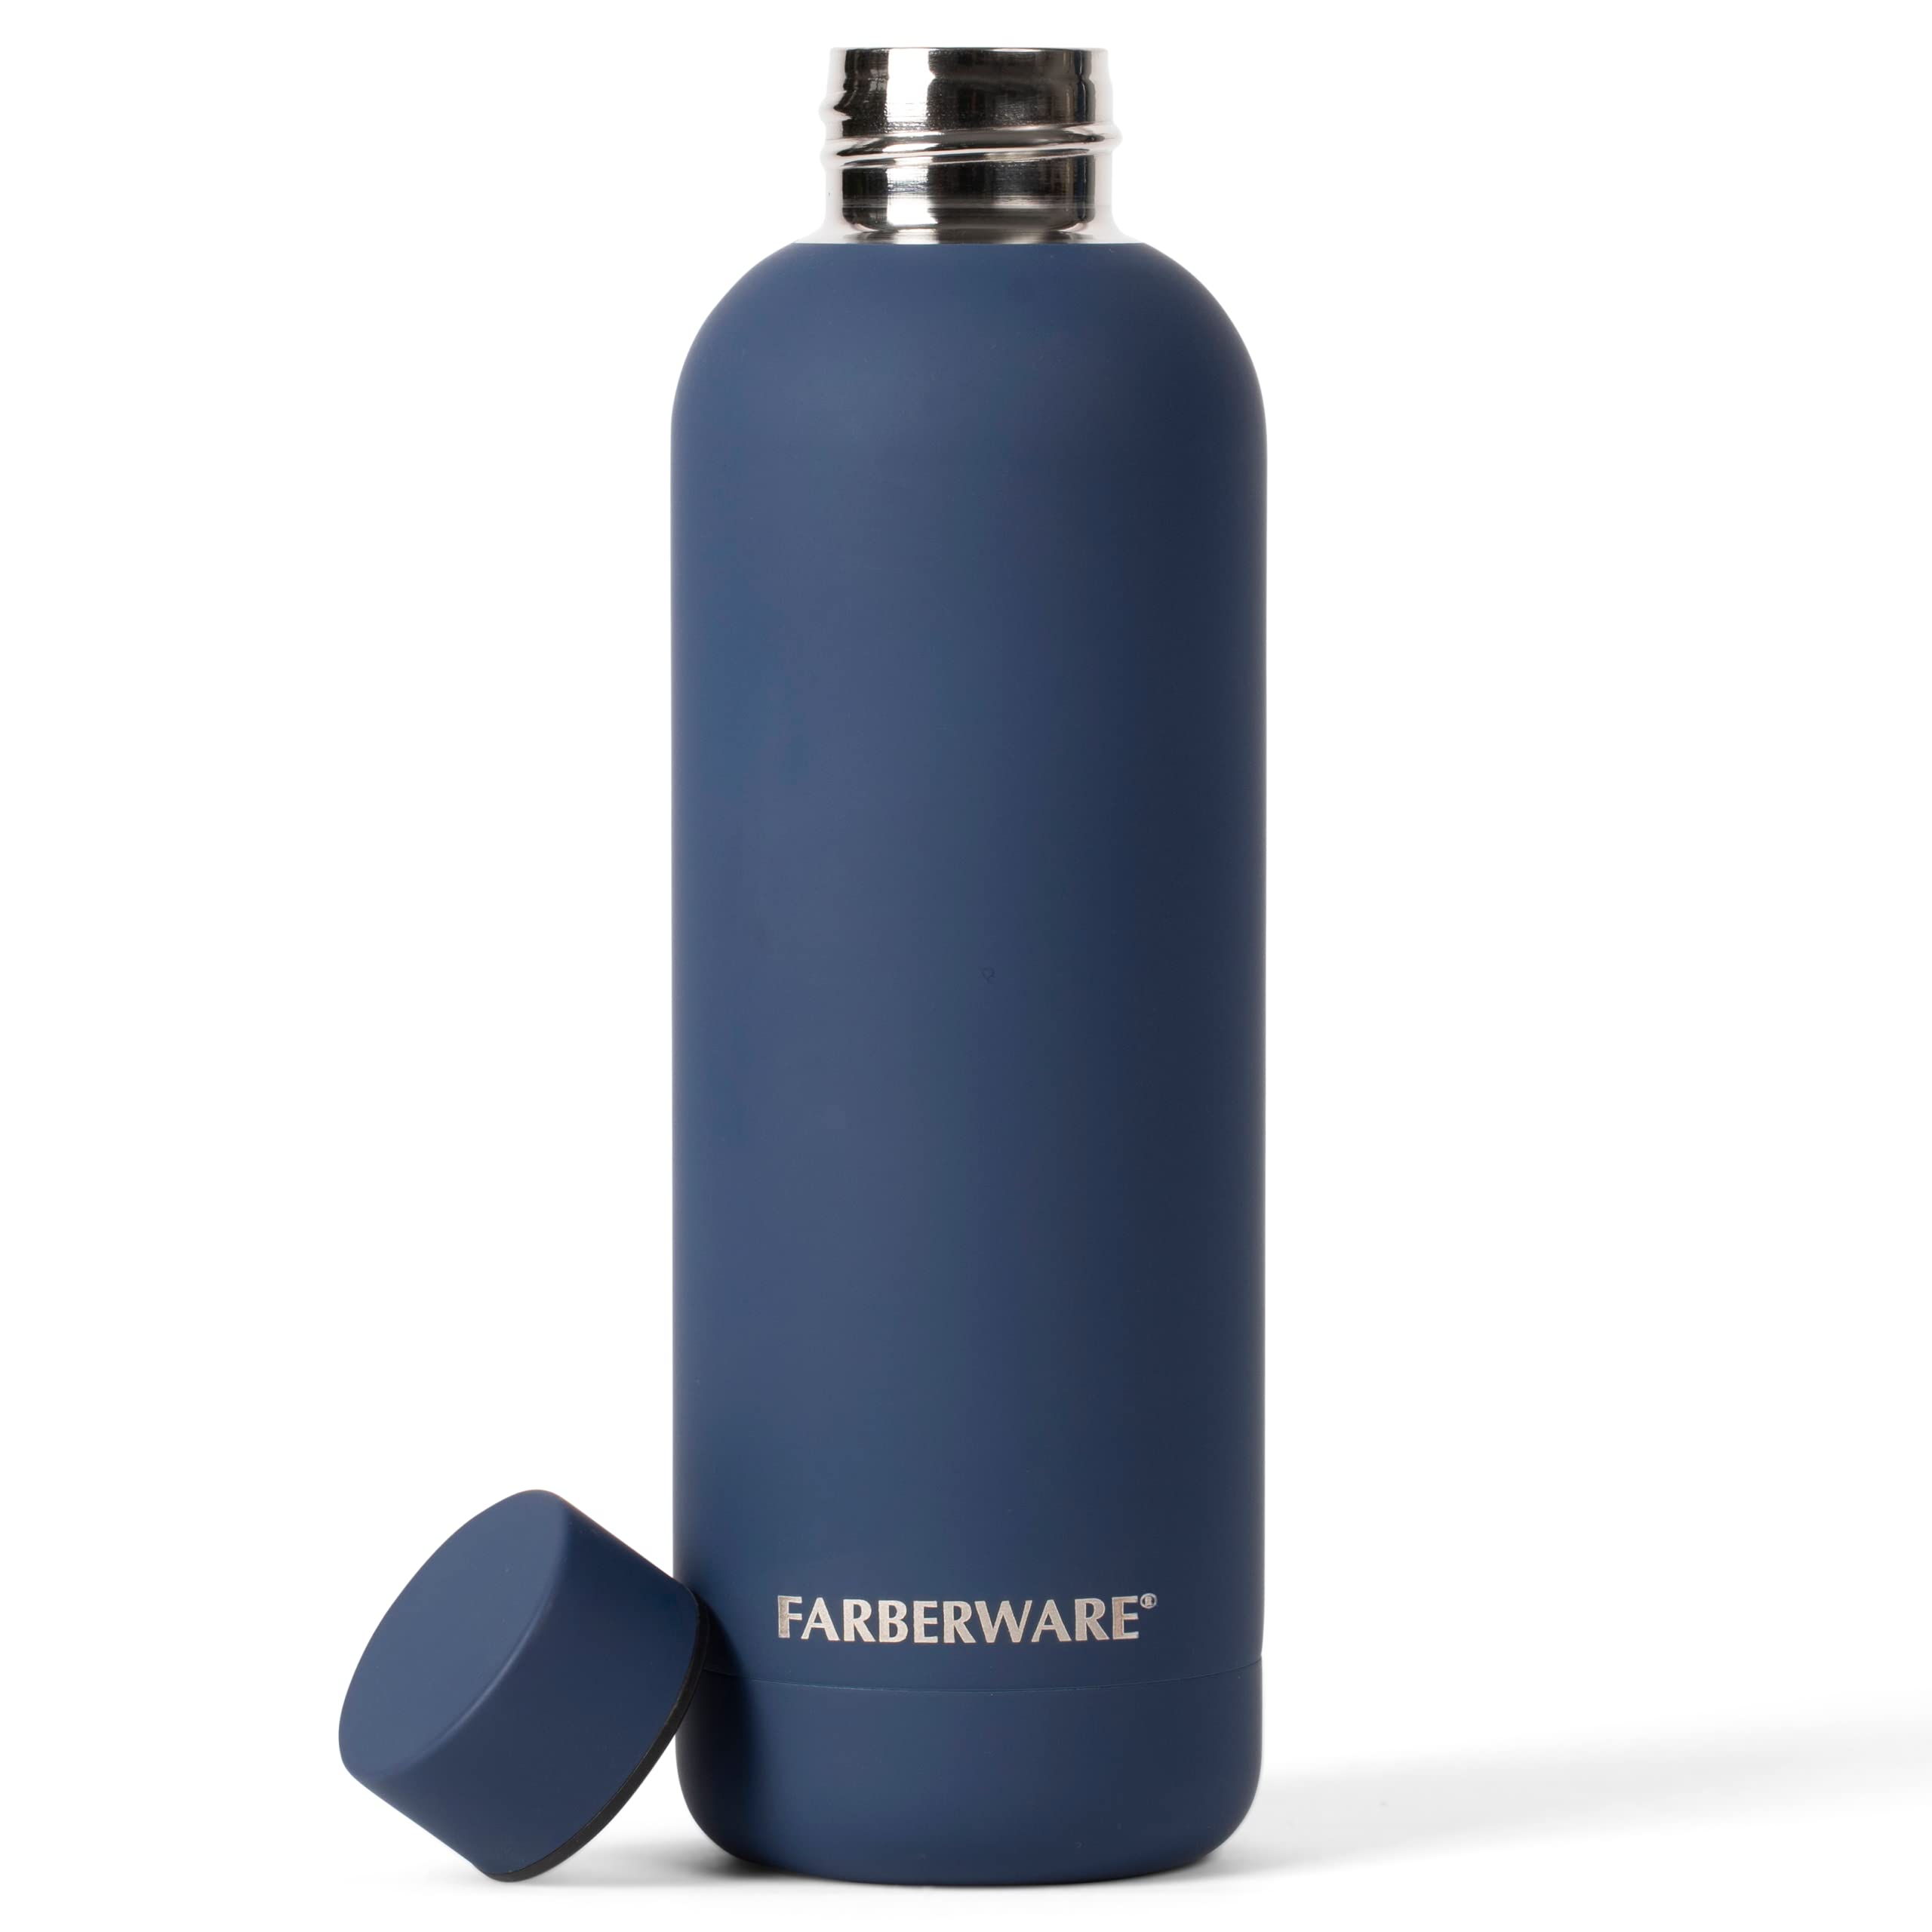 Farberware Stainless Steel Water Bottle, 48 Hrs Cold, 12 Hrs Hot, Double Wall Insulated, Leakproof Sweat Free Design (16oz, Blue)